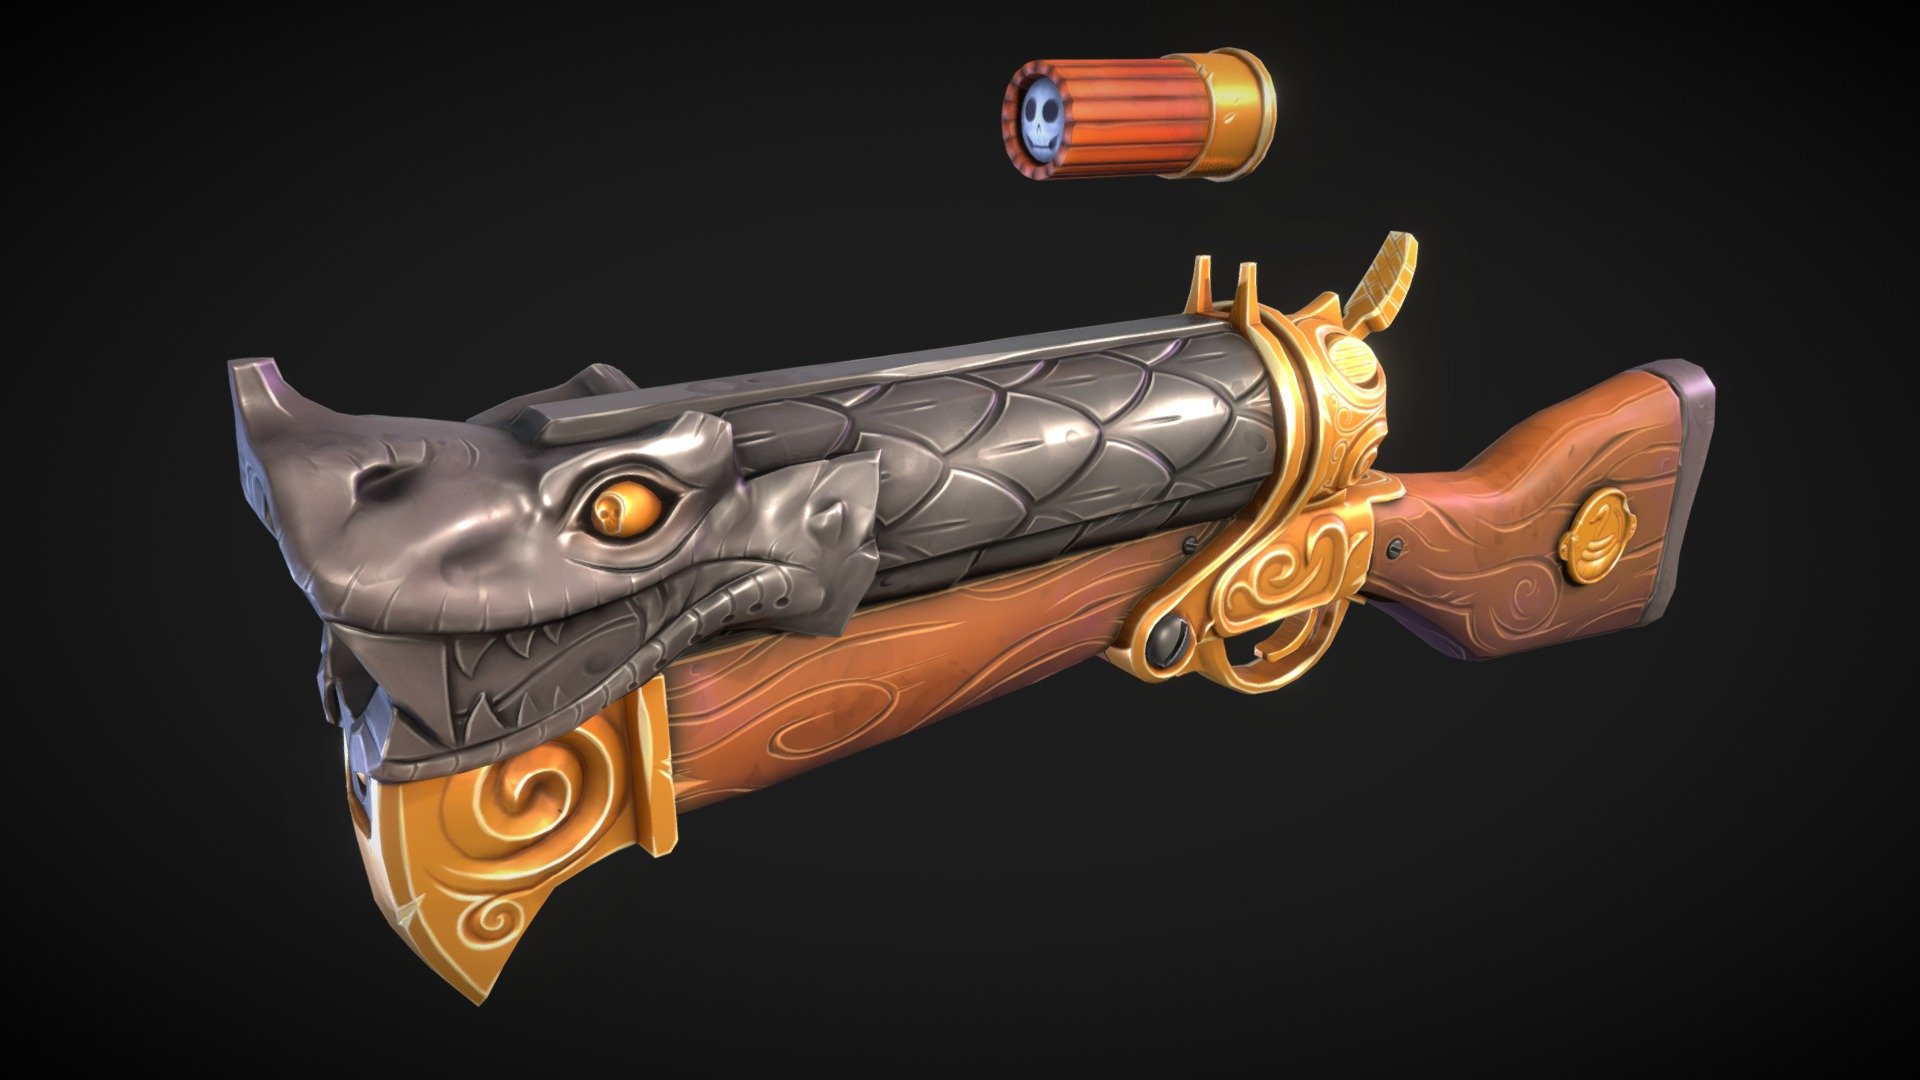 This is a fun side project that I worked on for about a month!

The original concept was created by Daniel Beaulieu:https://www.artstation.com/artwork/JByEn - Dragon's Breath Shotgun - 3D model by Nick Ford (@NickolasFord) 3d model